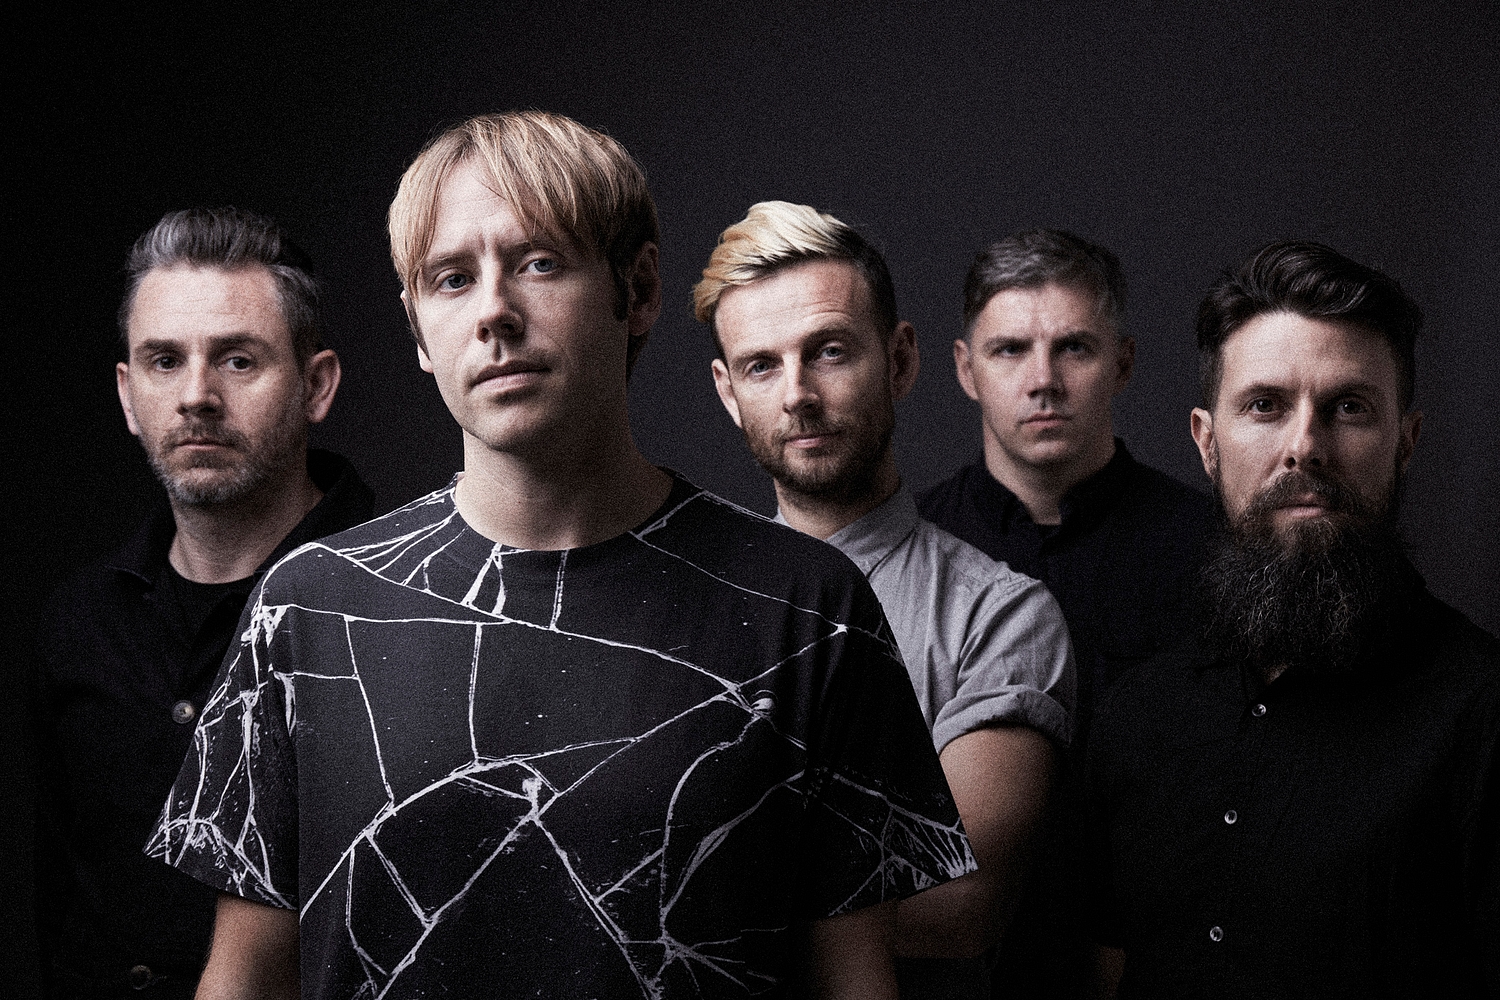 Go behind-the-scenes with No Devotion on the set of their ‘Permanent Sunlight’ music video